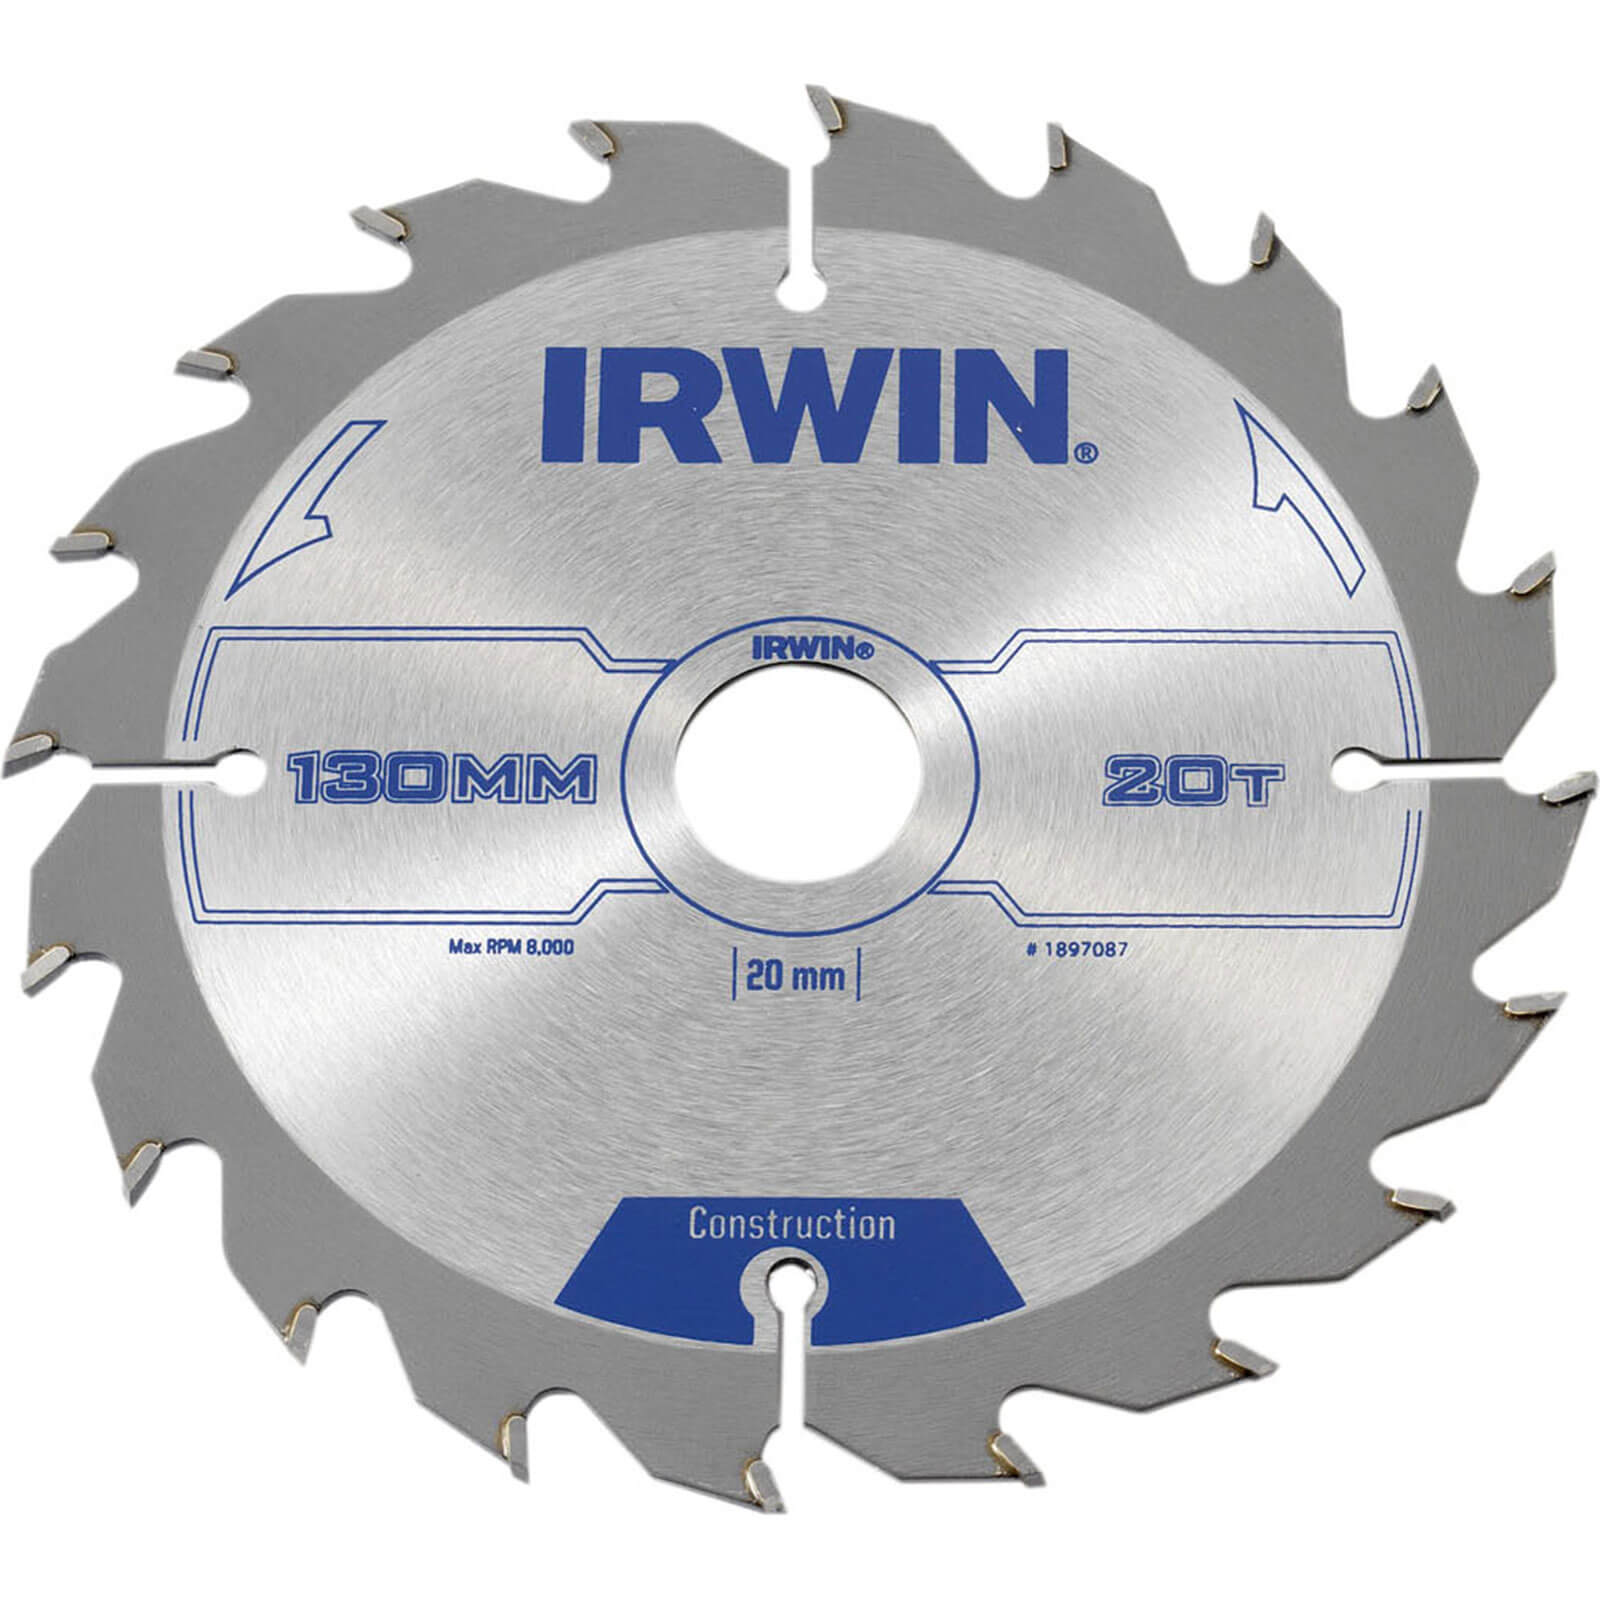 Photo of Irwin Atb Construction Circular Saw Blade 130mm 20t 20mm